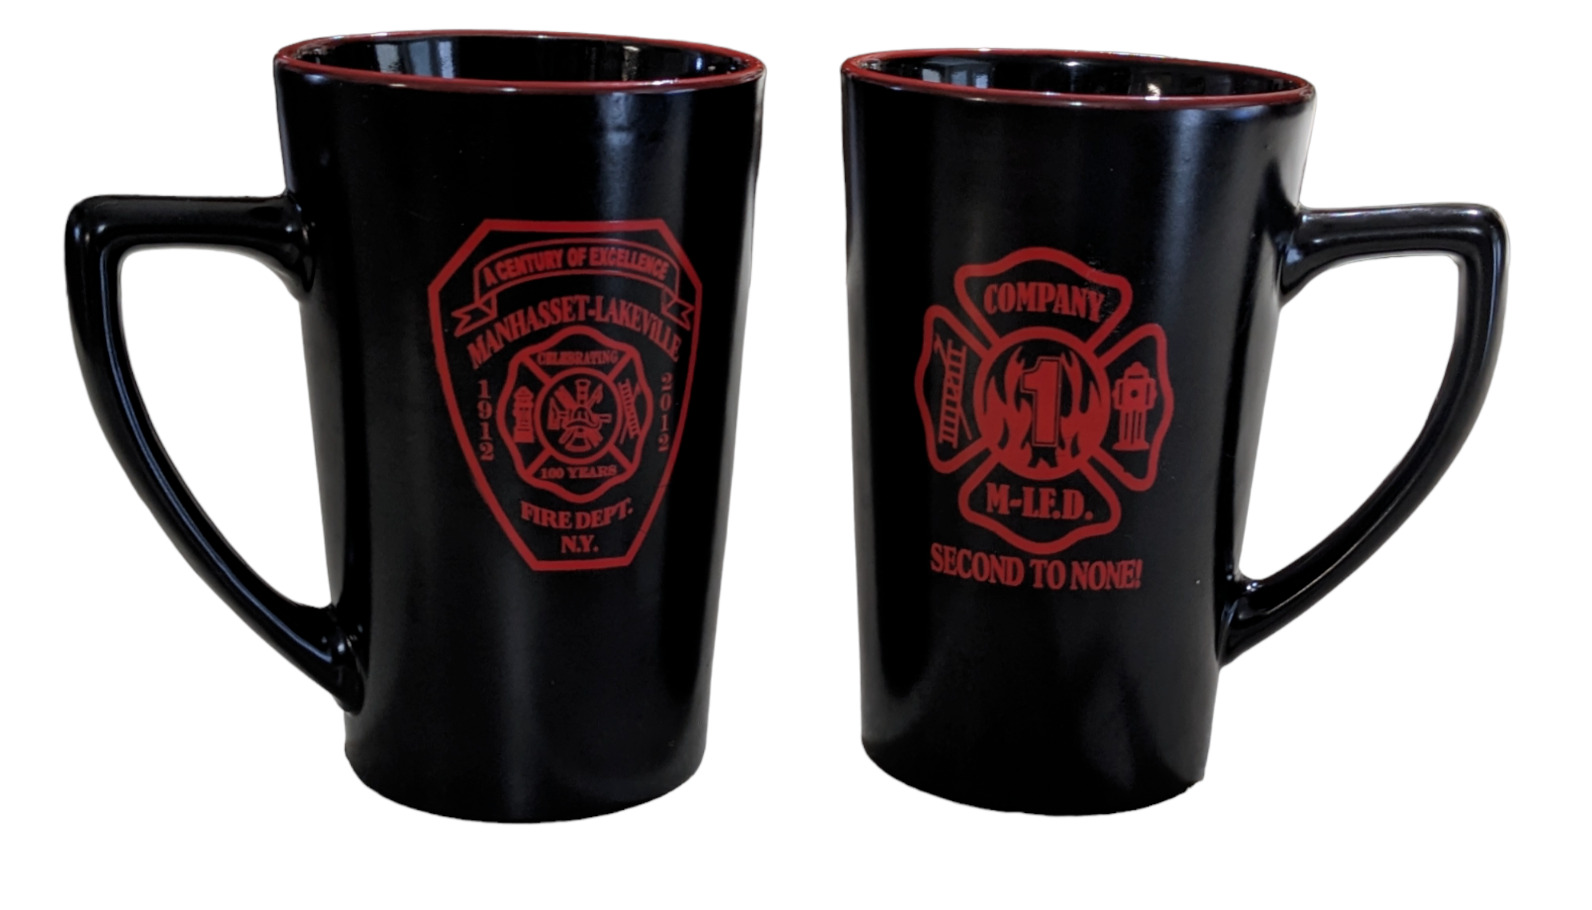 Set Of 2 Manhasset-Lakeville NY Fire Depart 100 Year Anniversary Mugs Cups 10 Oz